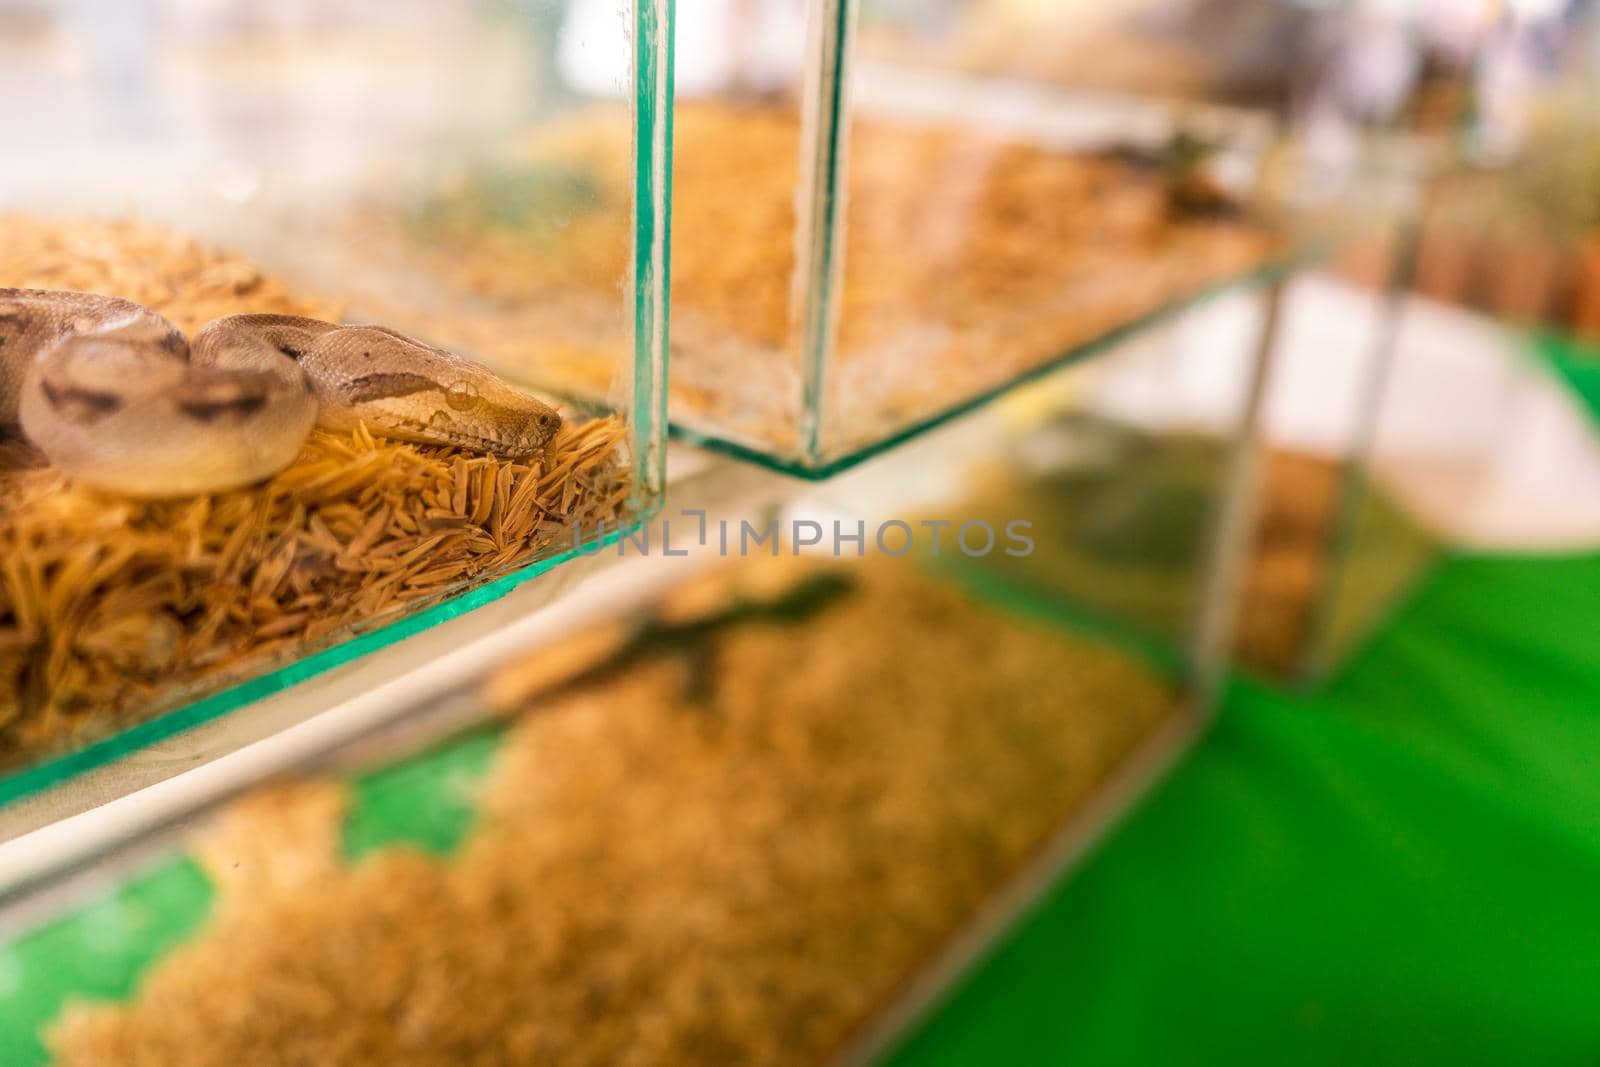 Baby boa inside a glass tank at an exotic animal pet store by cfalvarez